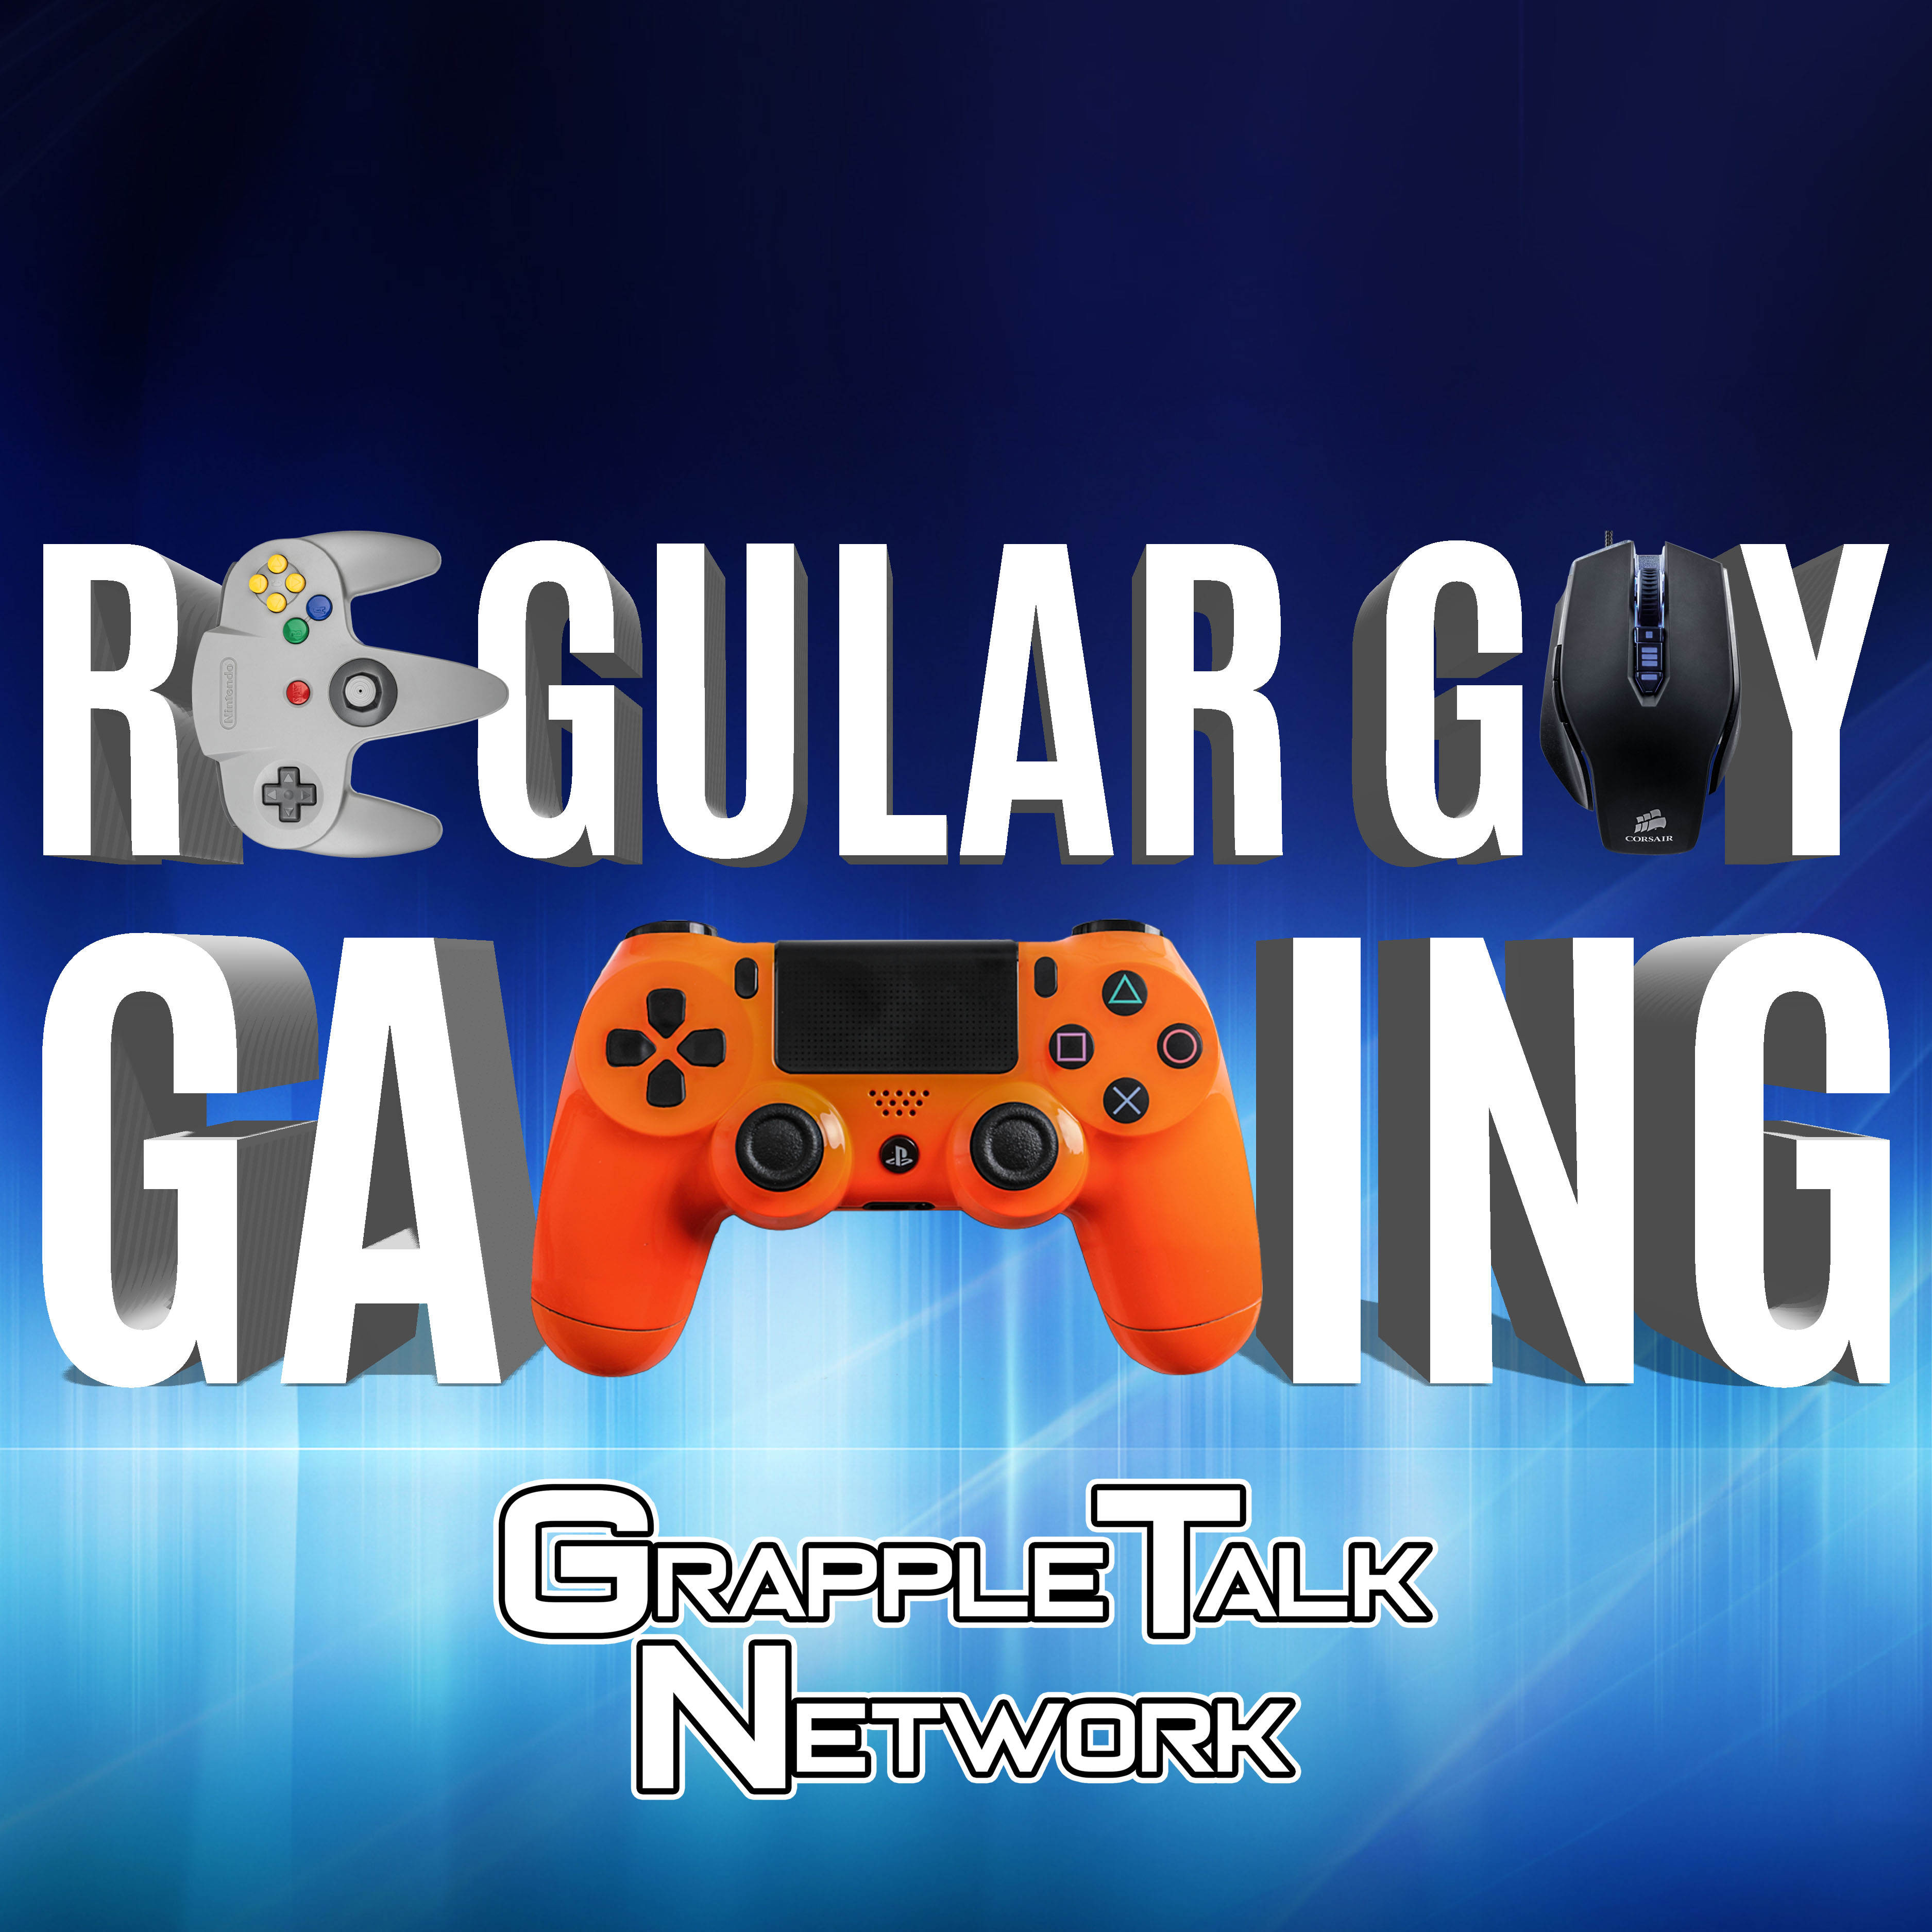 Regular Guy Gaming #19: Video game ADDICTION & Dragon Ball FighterZ review! 